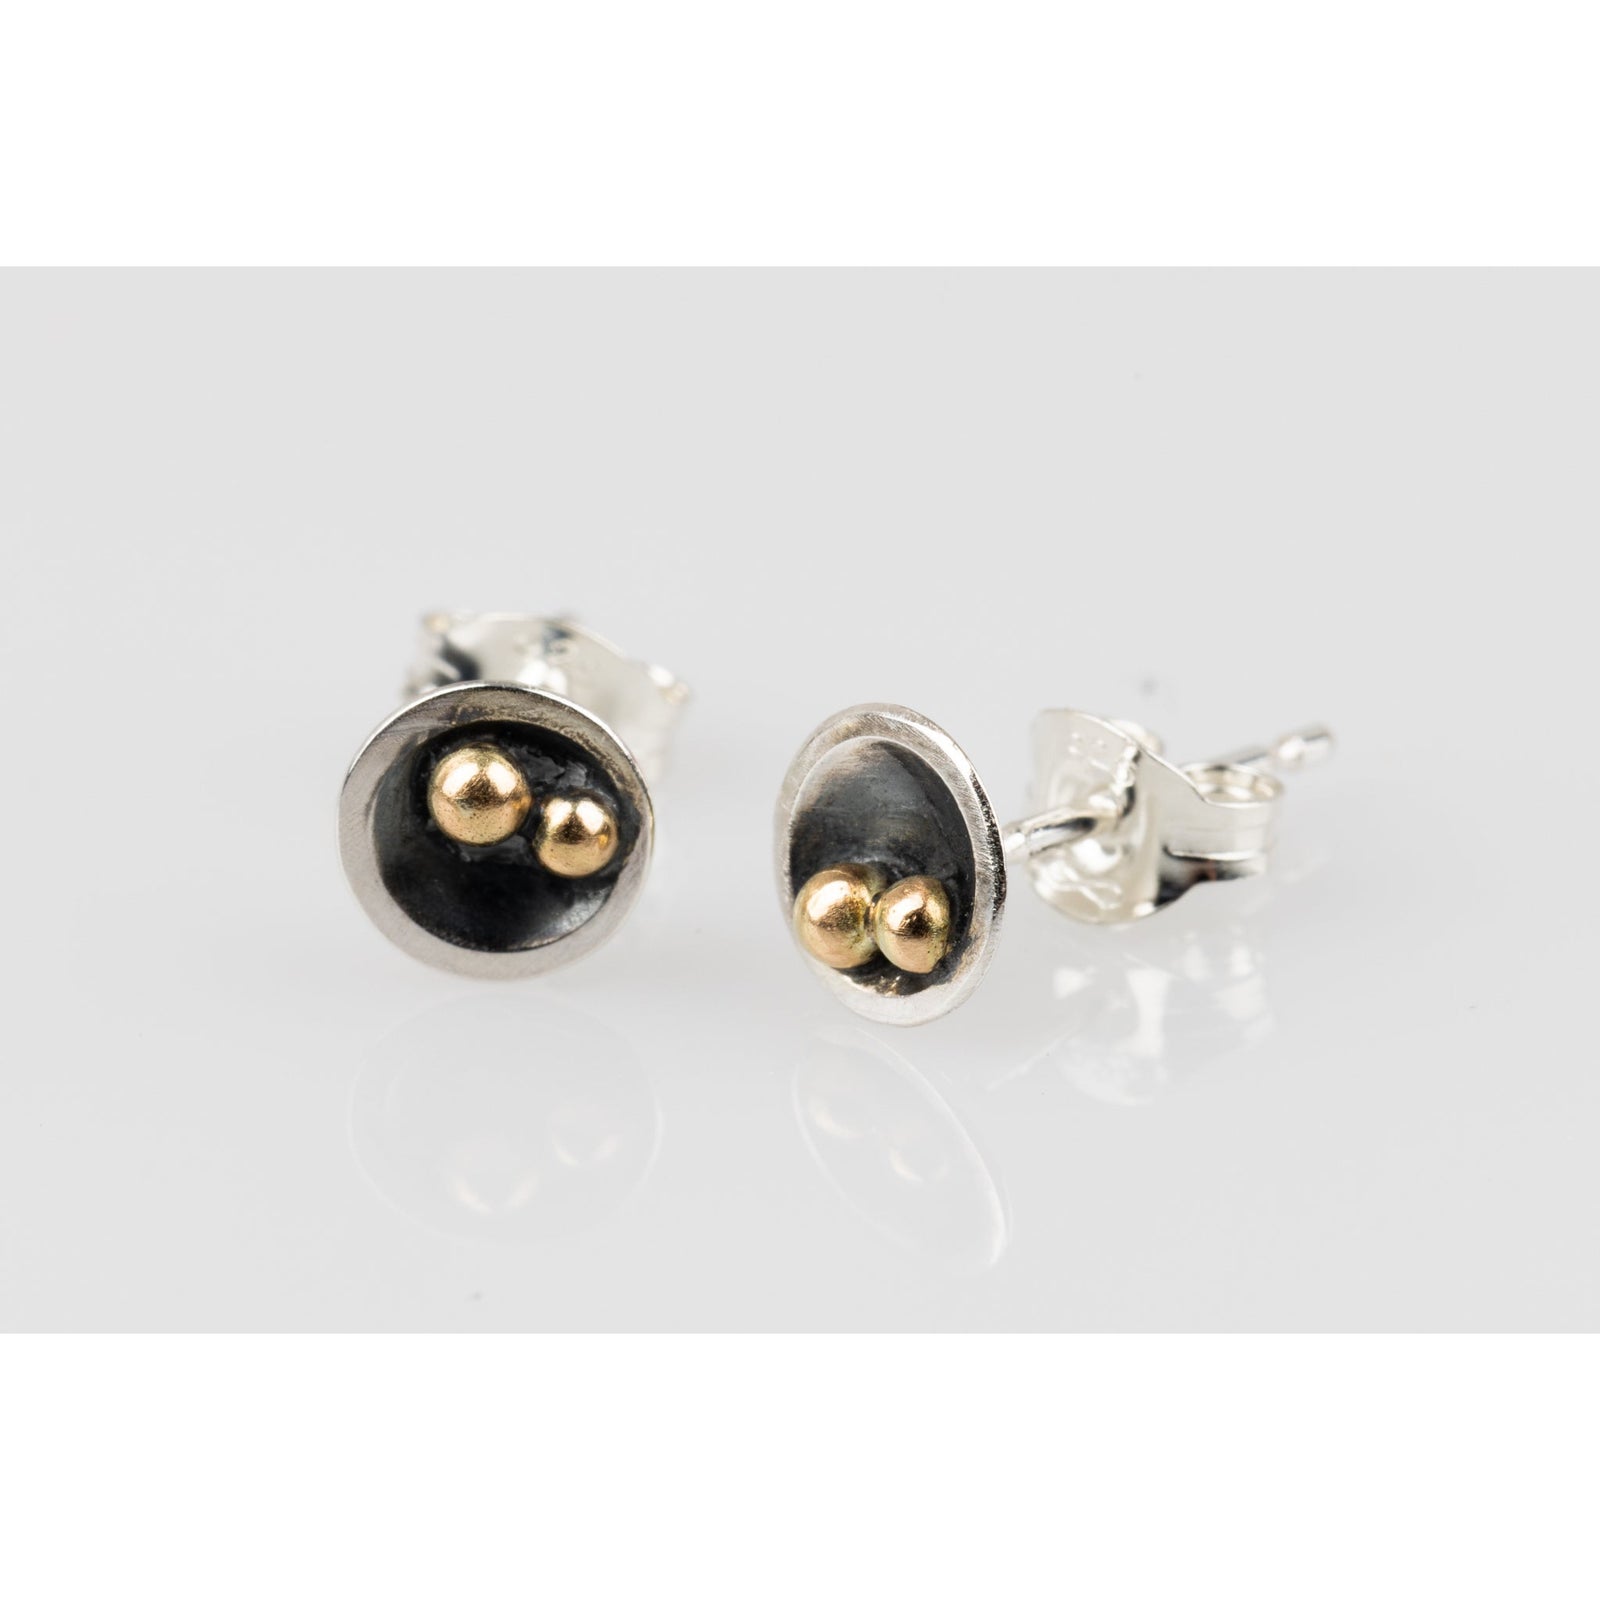 'SA Ea46 Domed oxidised studs' by Sandra Austin jewellery, available at Padstow Gallery, Cornwall